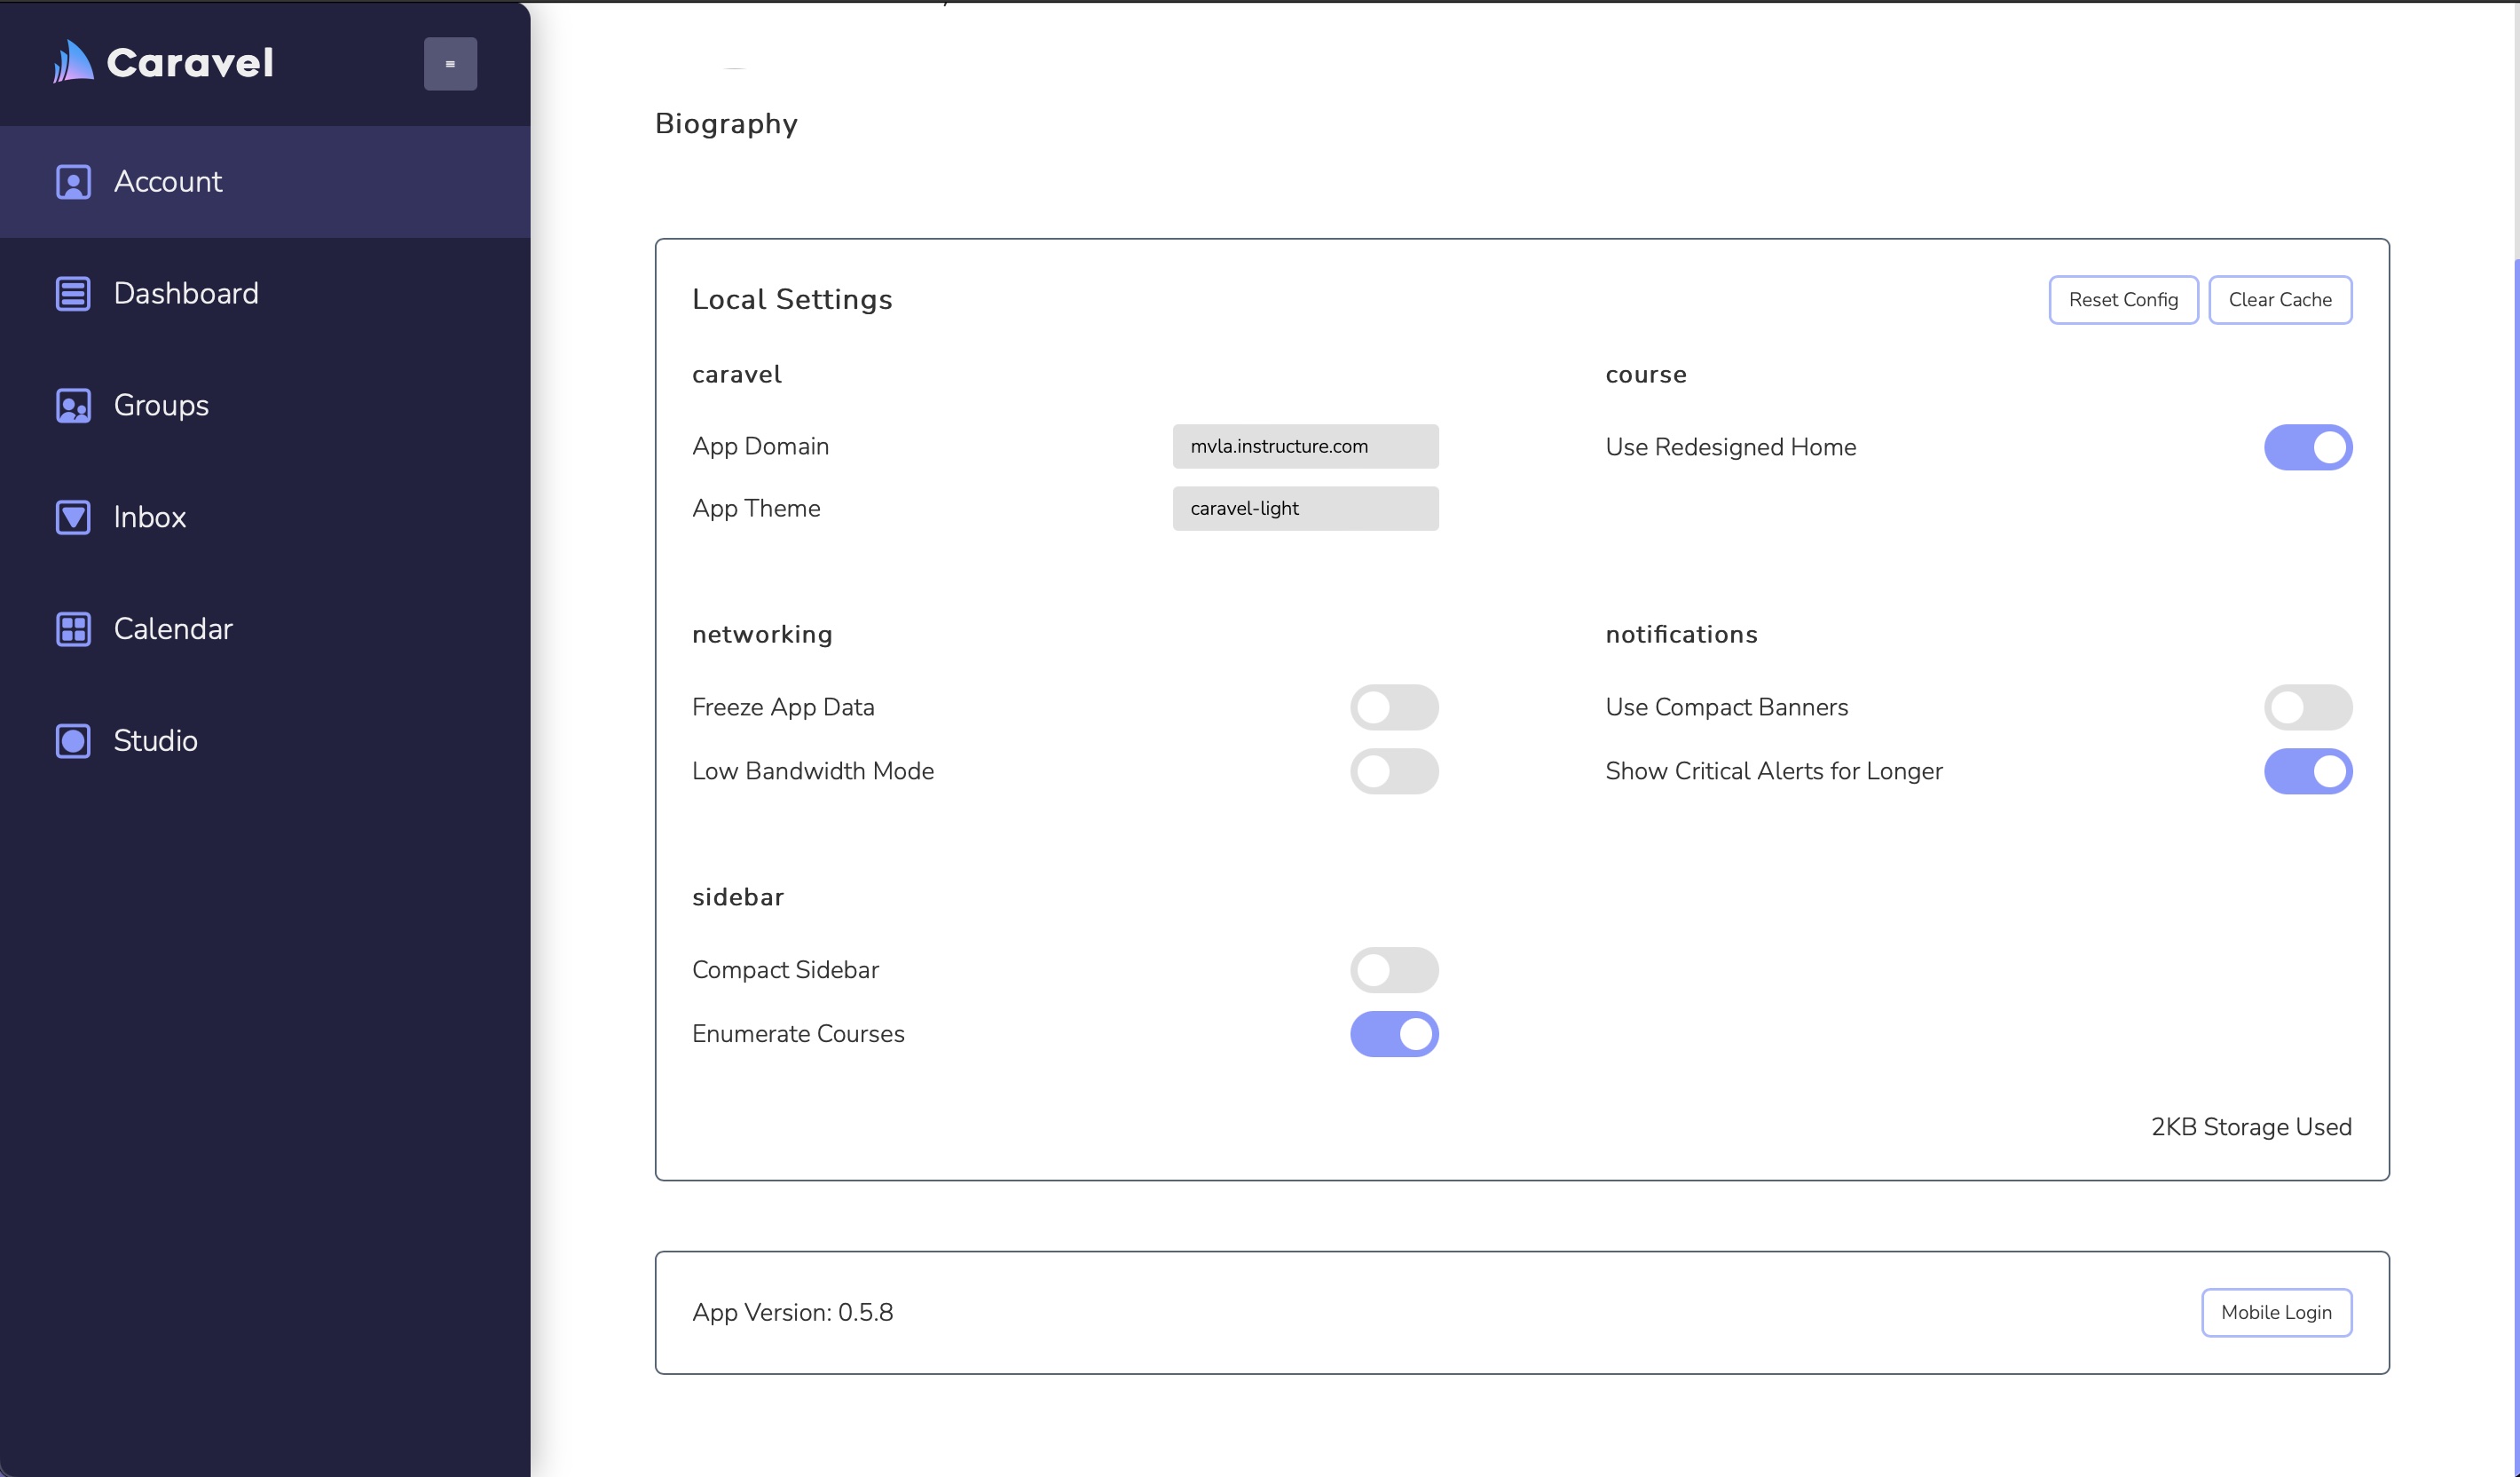 Caravel settings page - different theme